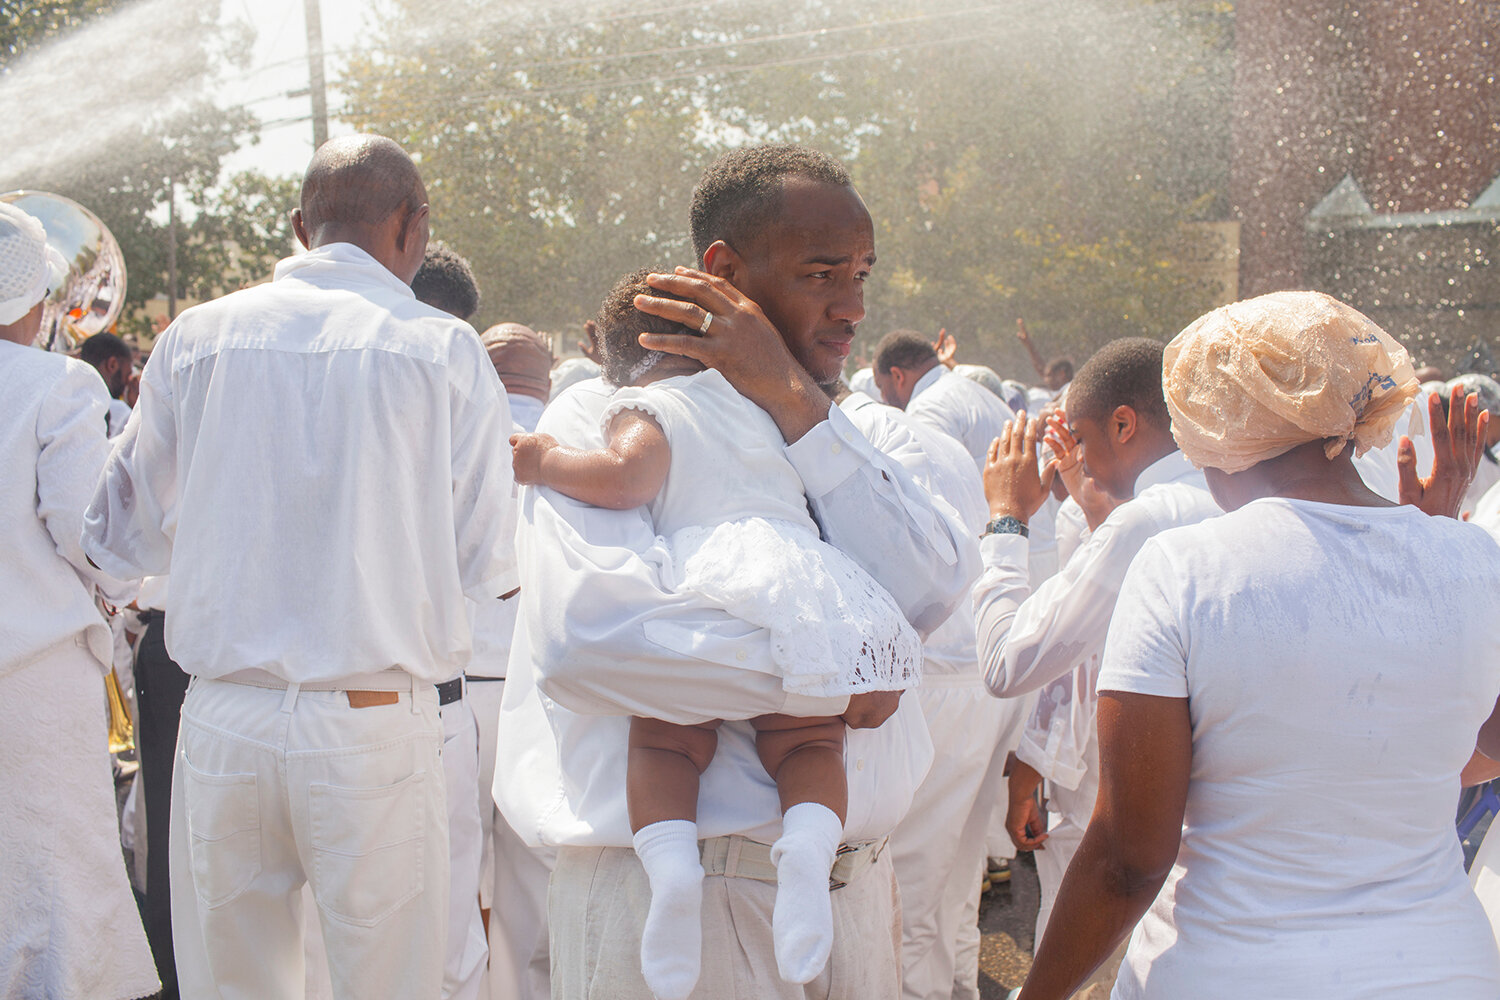   Firehose baptism, Newport News, Virginia  Image: 2013/printed: 2020 Edition: 1/10  Archival pigment print 16 x 24 in. (image size)  The Do Good Fund, Inc., 2020-005  